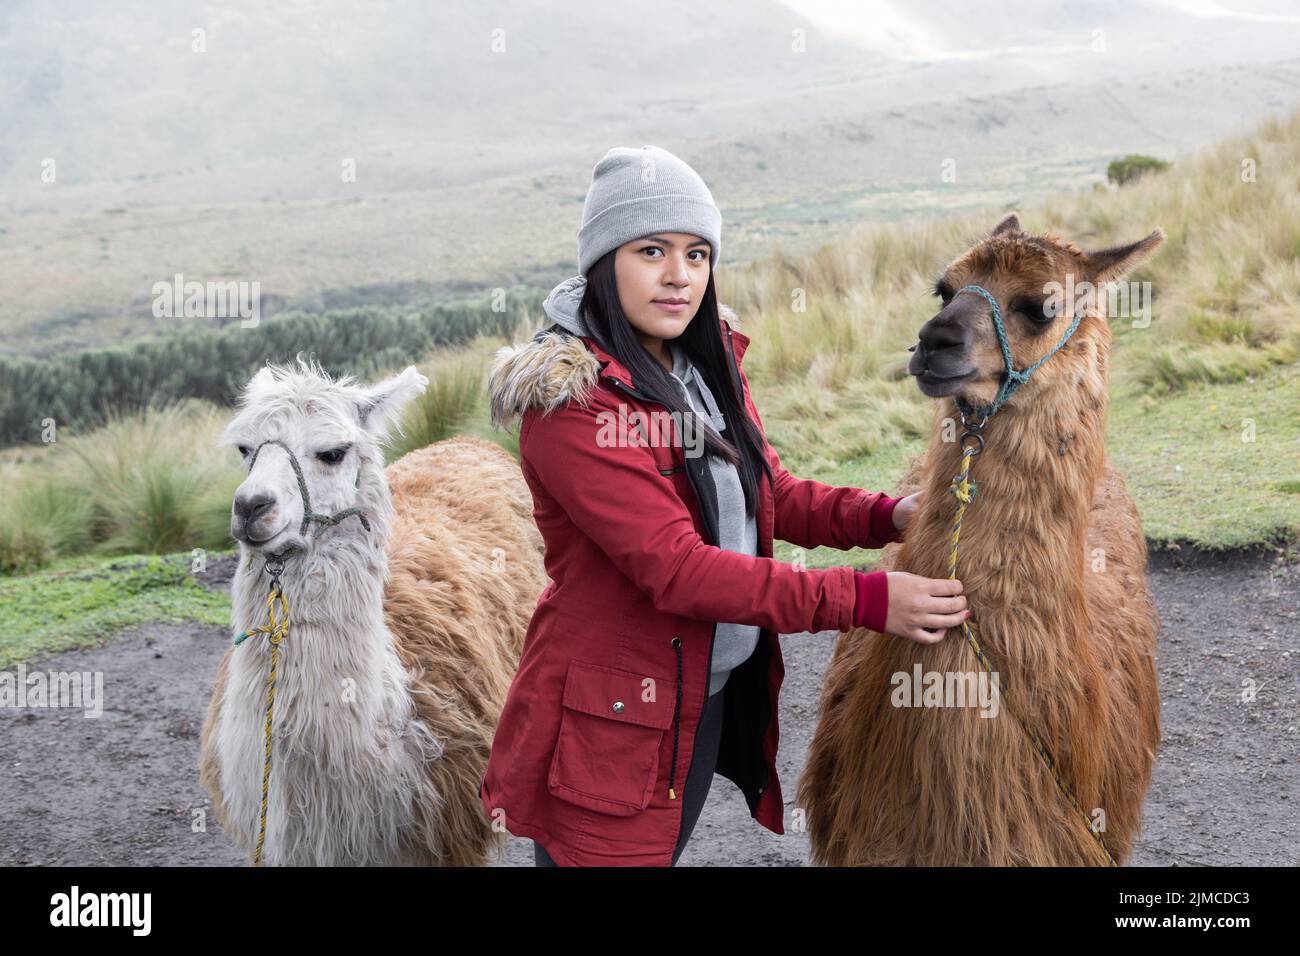 rural destination with young woman wearing a winter clothes while walking with some llamas, mammal domestic animal, landscape with nature in the field Stock Photo